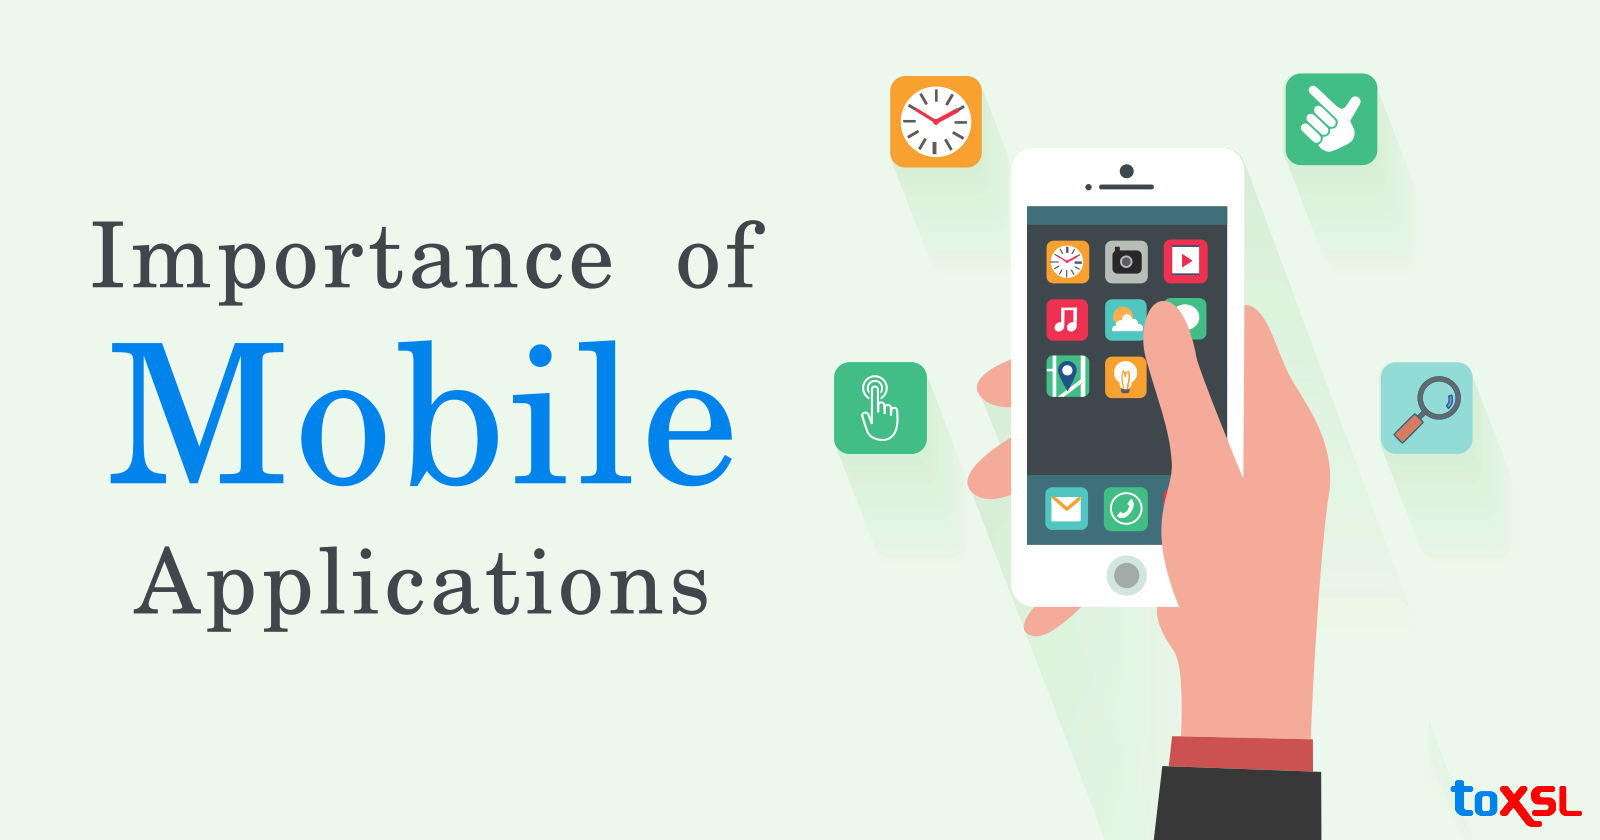 Why we use Mobile Application Nowadays?